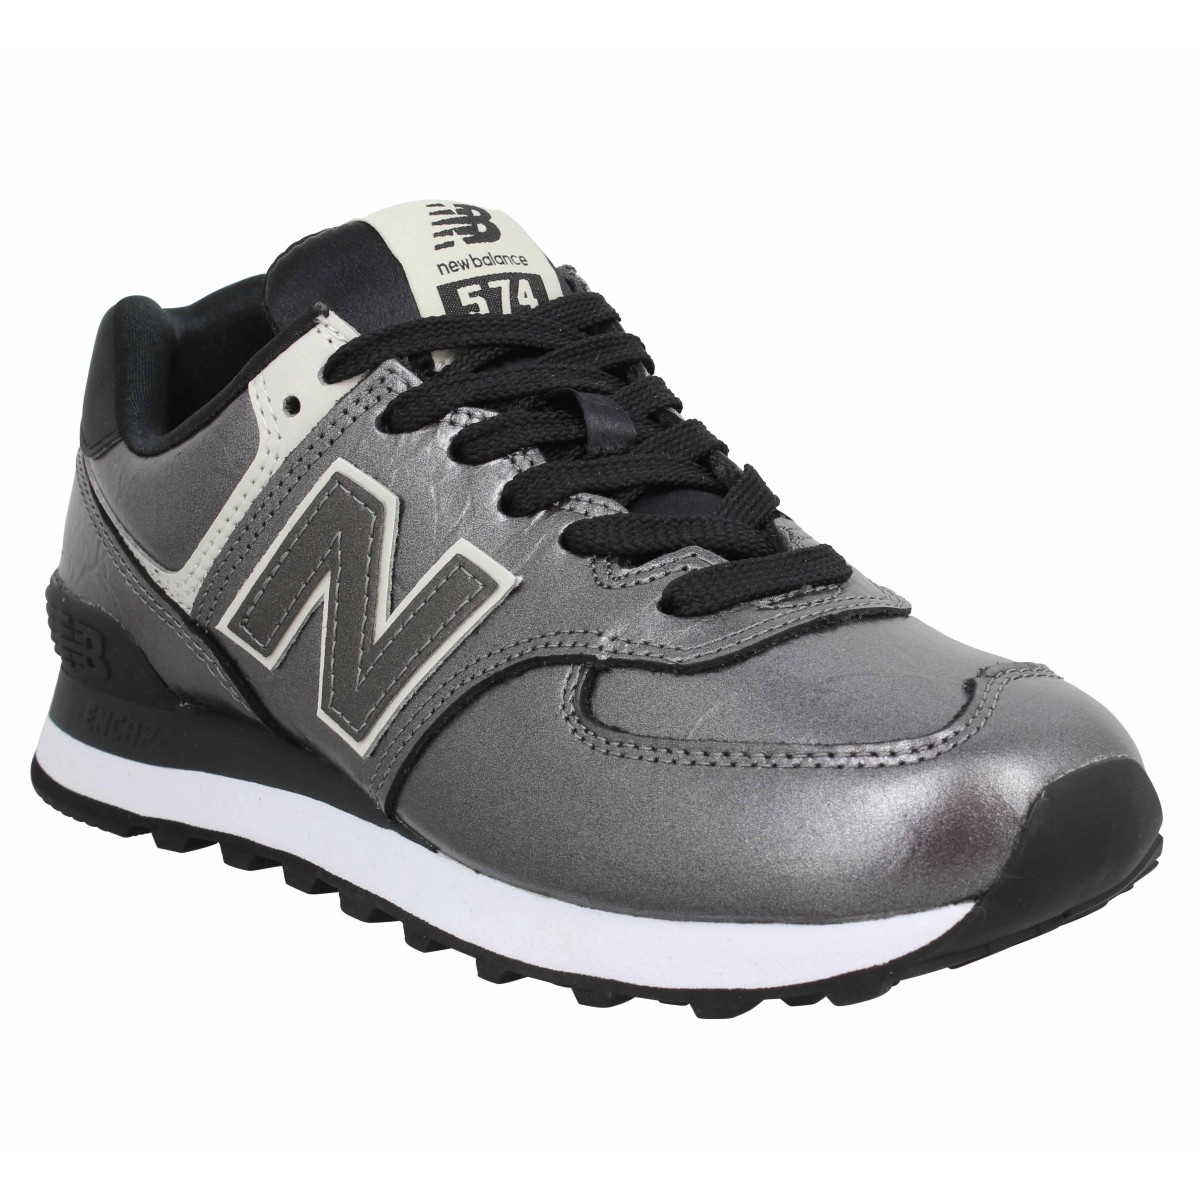 New balance 574 metal femme anthracite femme | Fanny chaussures